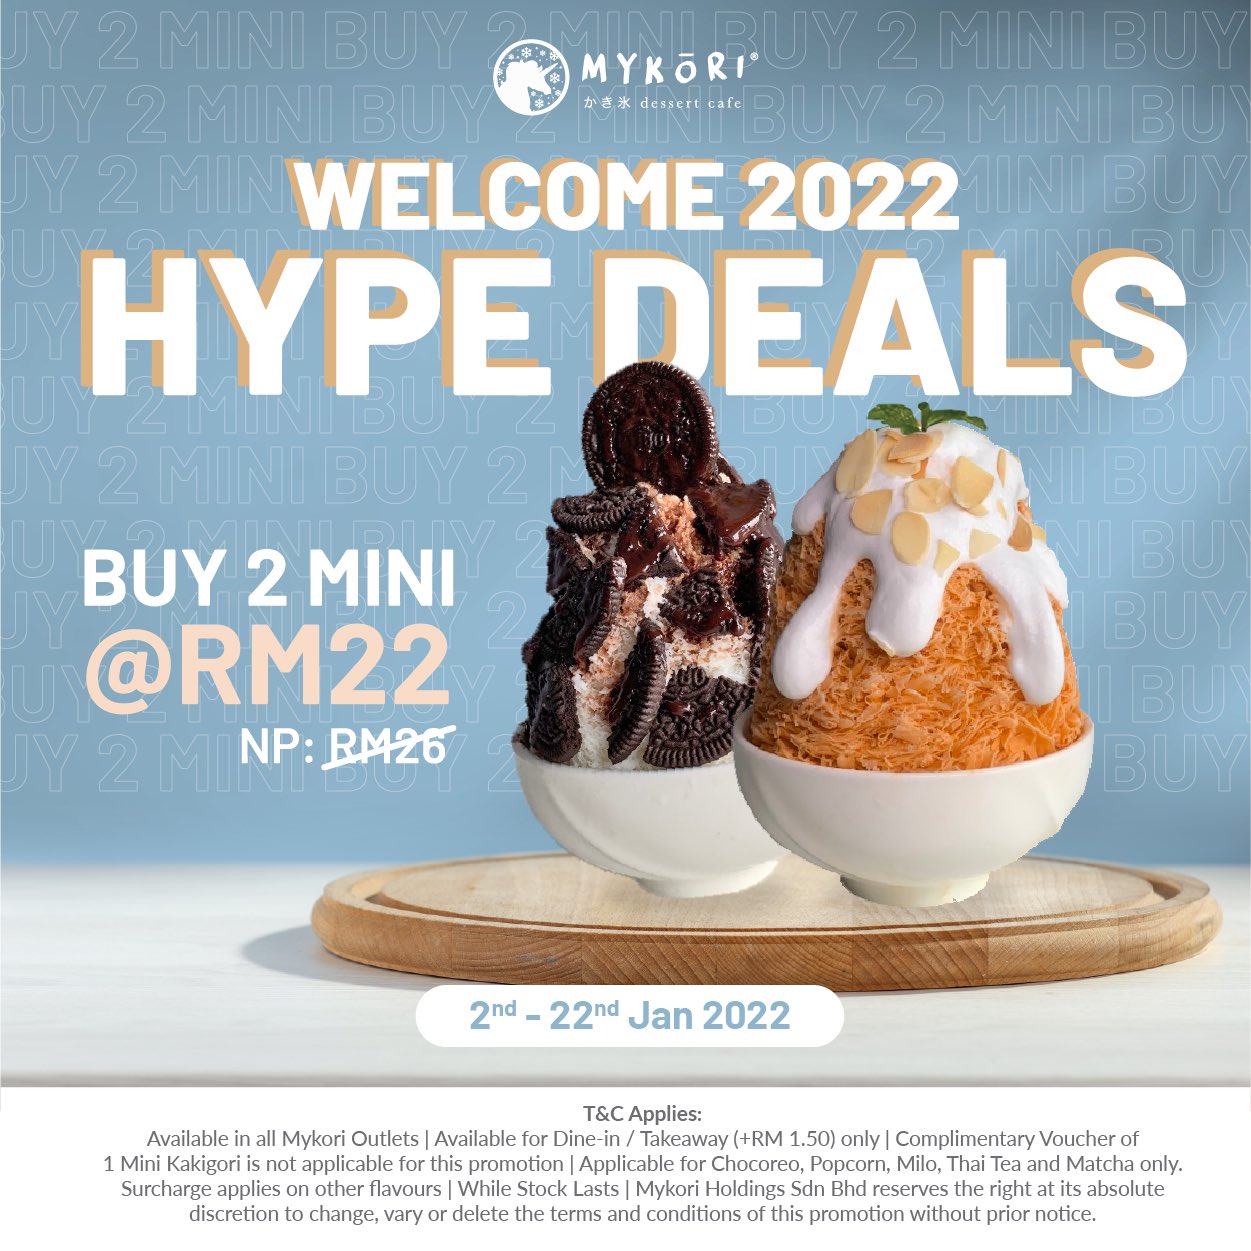 Welcoming 2022 with HYPE DEALS